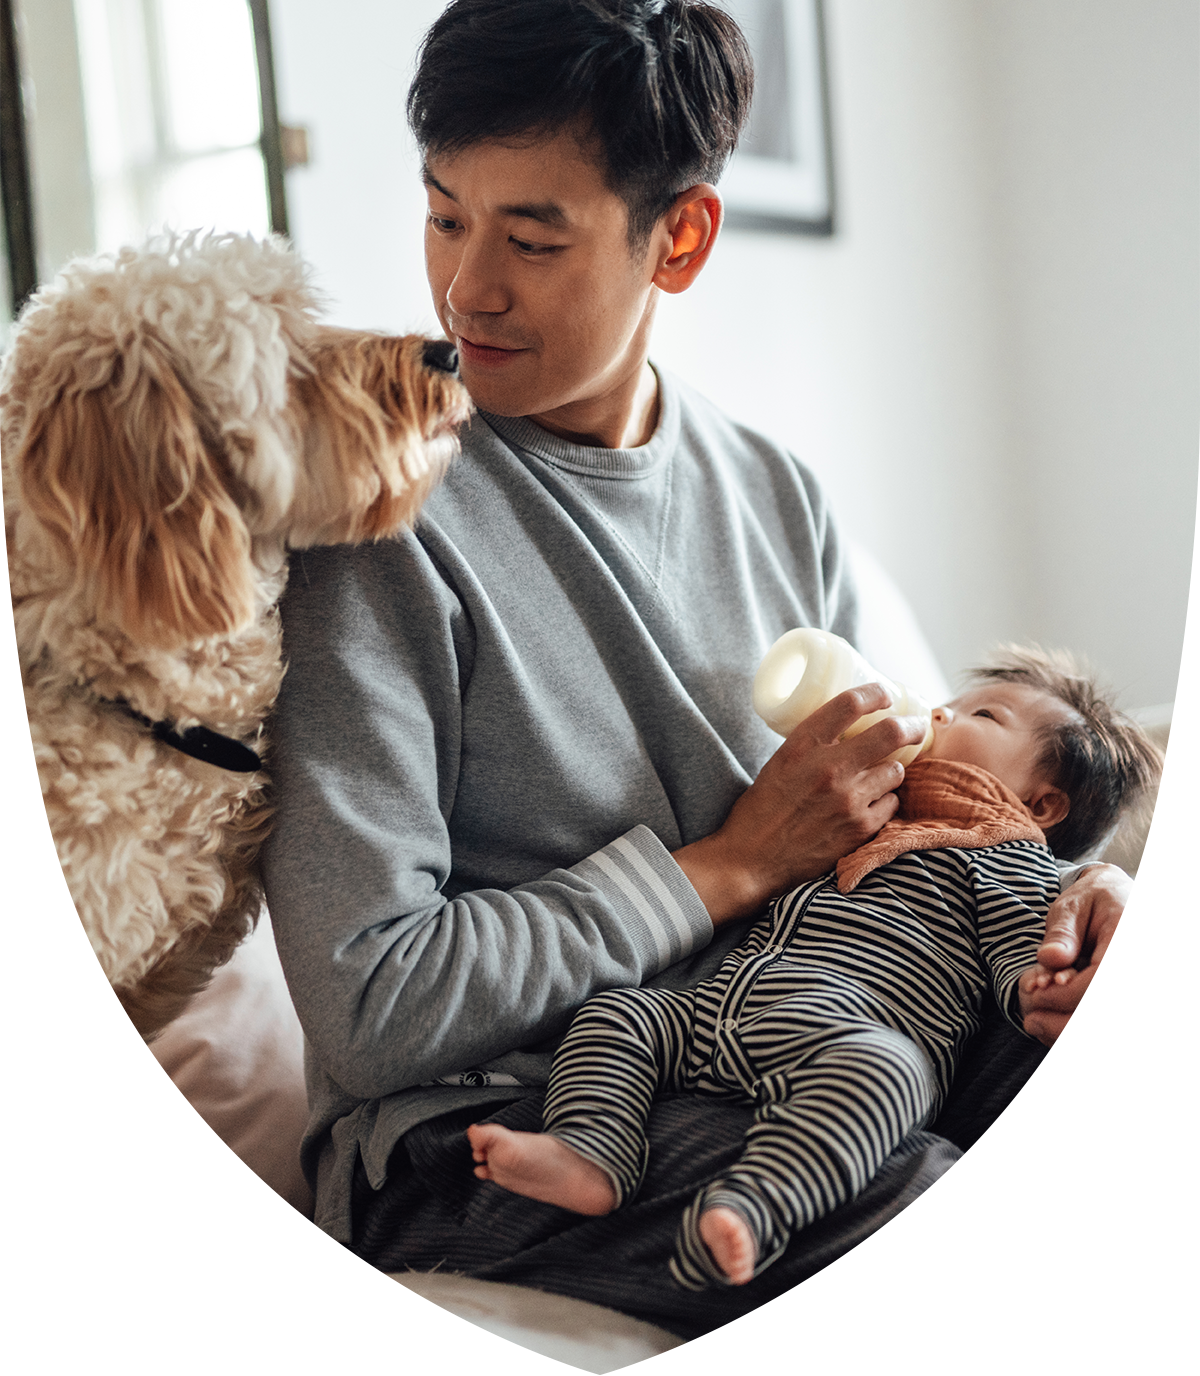 A man holding a baby and a dog over his shoulder